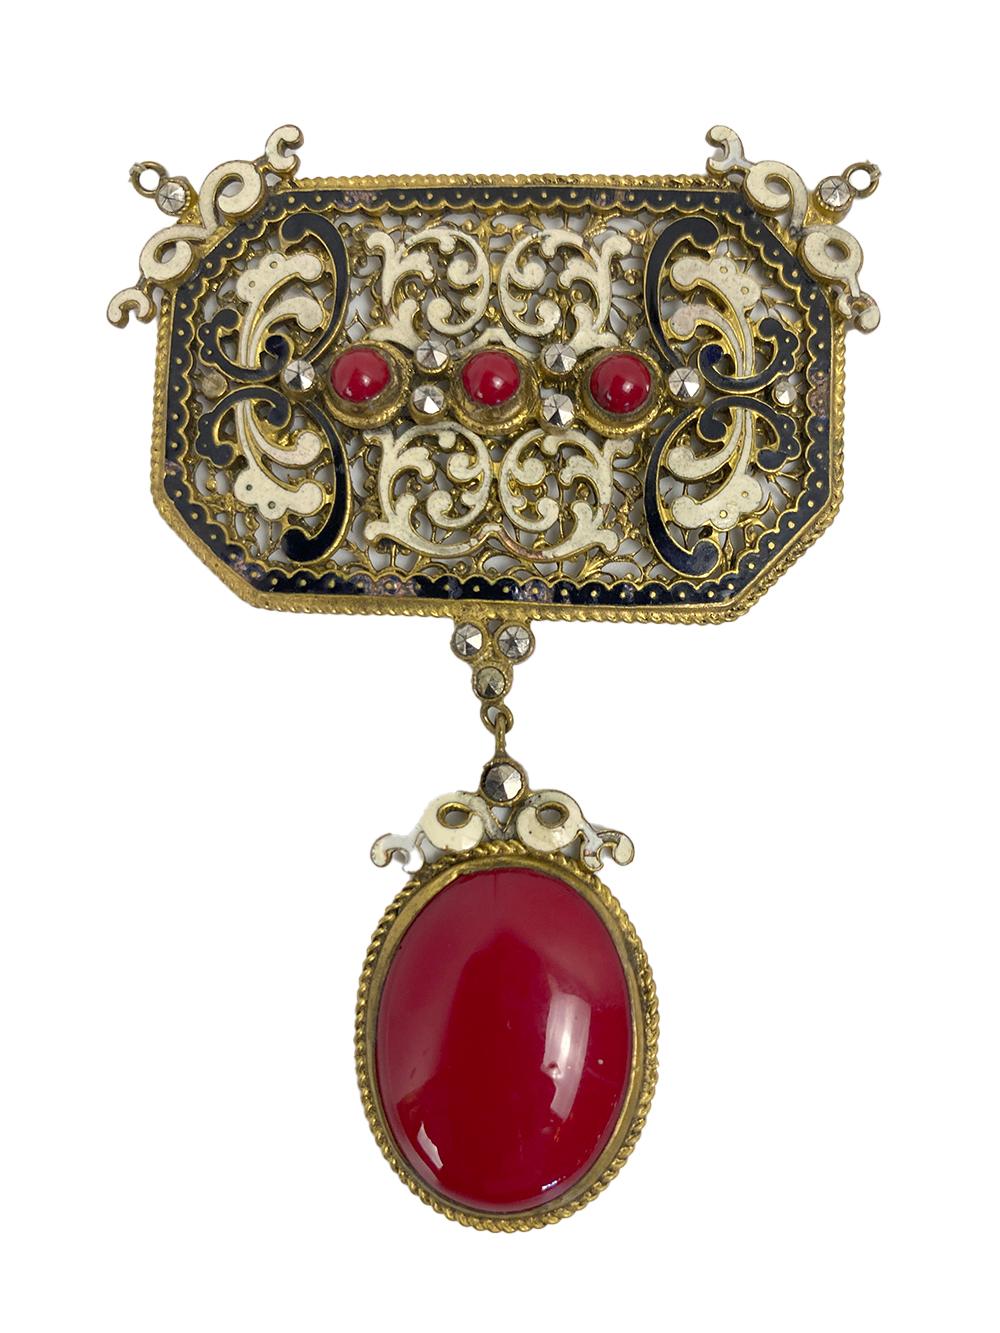 This unusual pendant has it all. very delicate work, stones and gold

